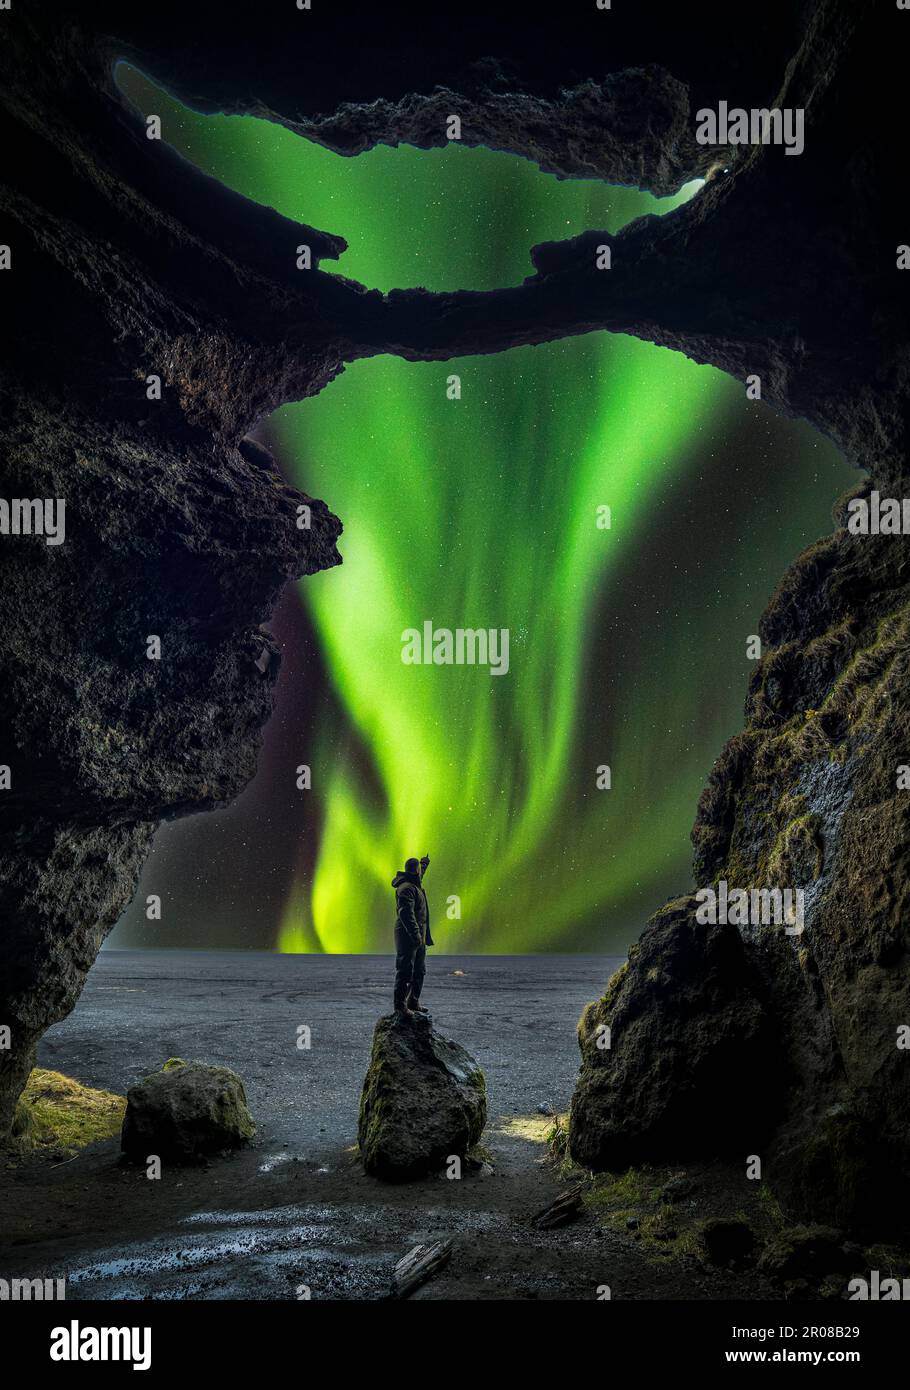 Yoda Cave in Iceland with Northern Lights Stock Photo